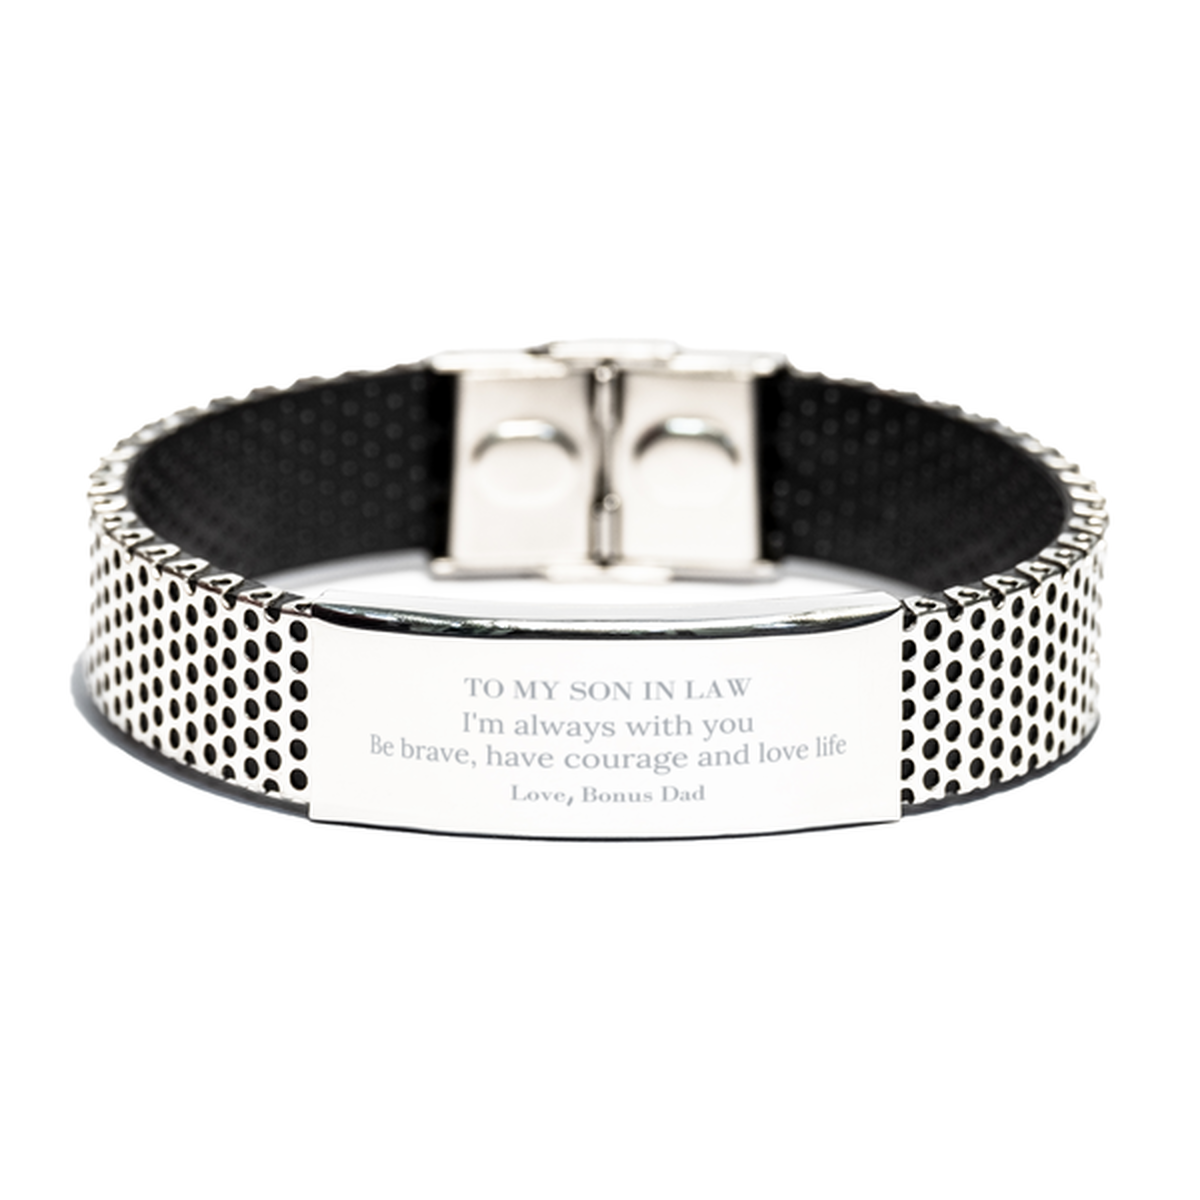 To My Son In Law Gifts from Bonus Dad, Unique Stainless Steel Bracelet Inspirational Christmas Birthday Graduation Gifts for Son In Law I'm always with you. Be brave, have courage and love life. Love, Bonus Dad